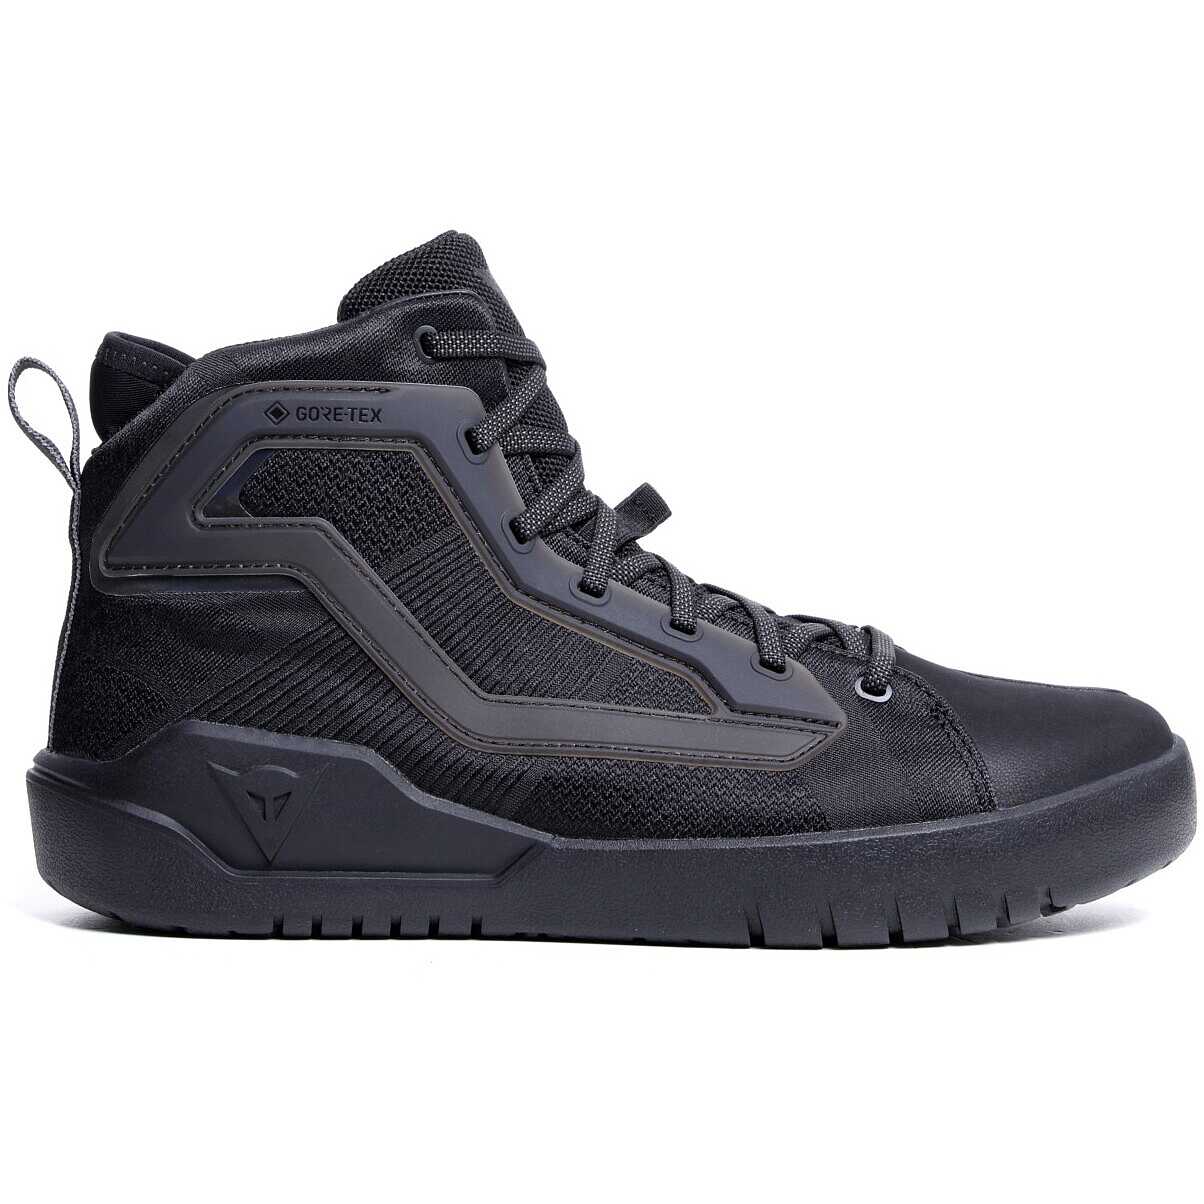 Dainese URBACTIVE GORE-TEX Motorcycle Shoes Black For Sale Online ...